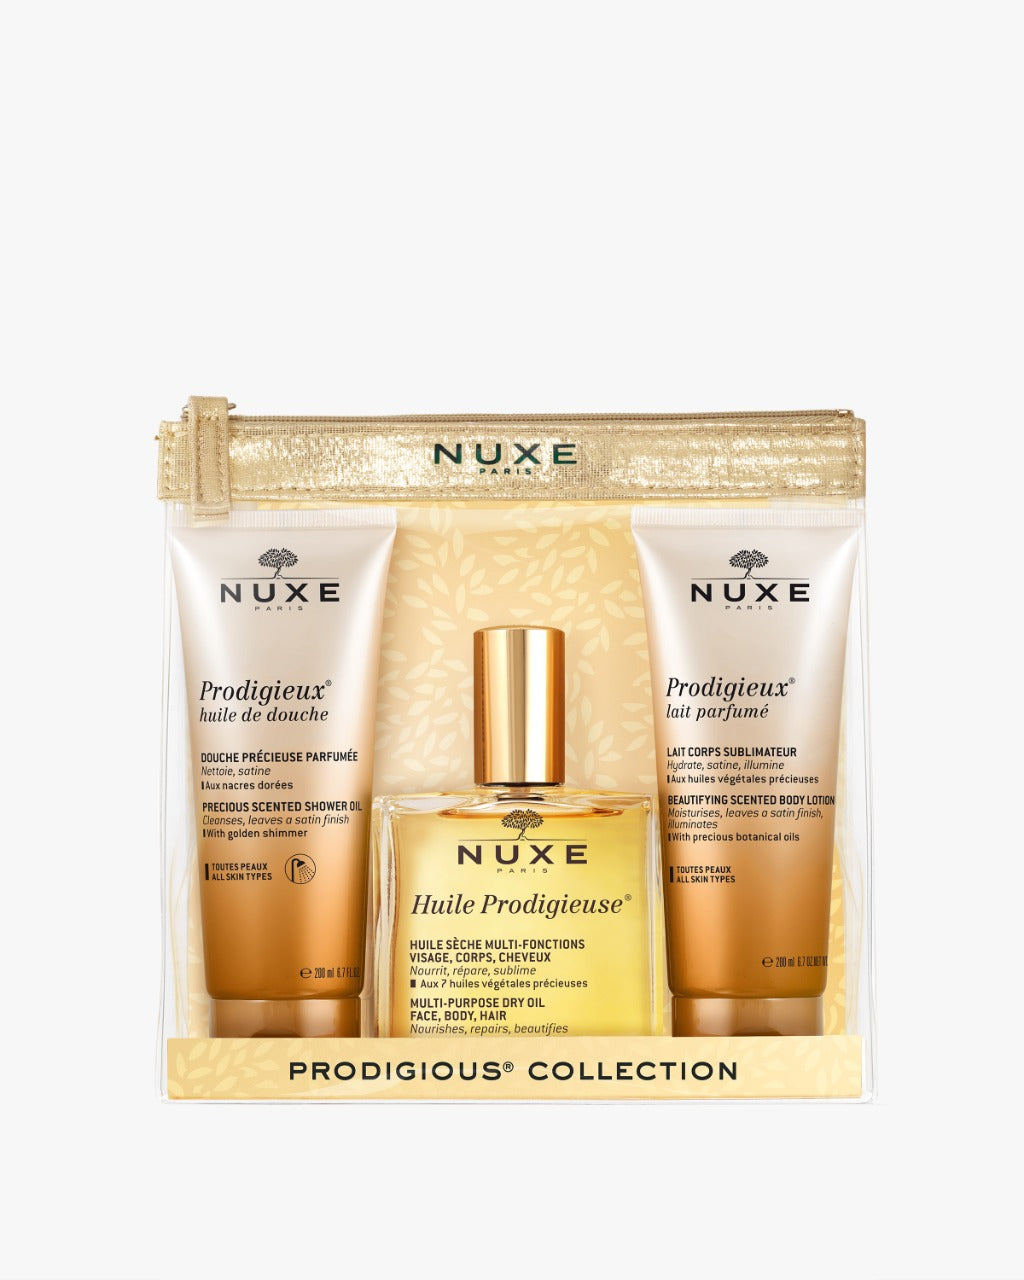 Travel with Nuxe - Prodigious Collection